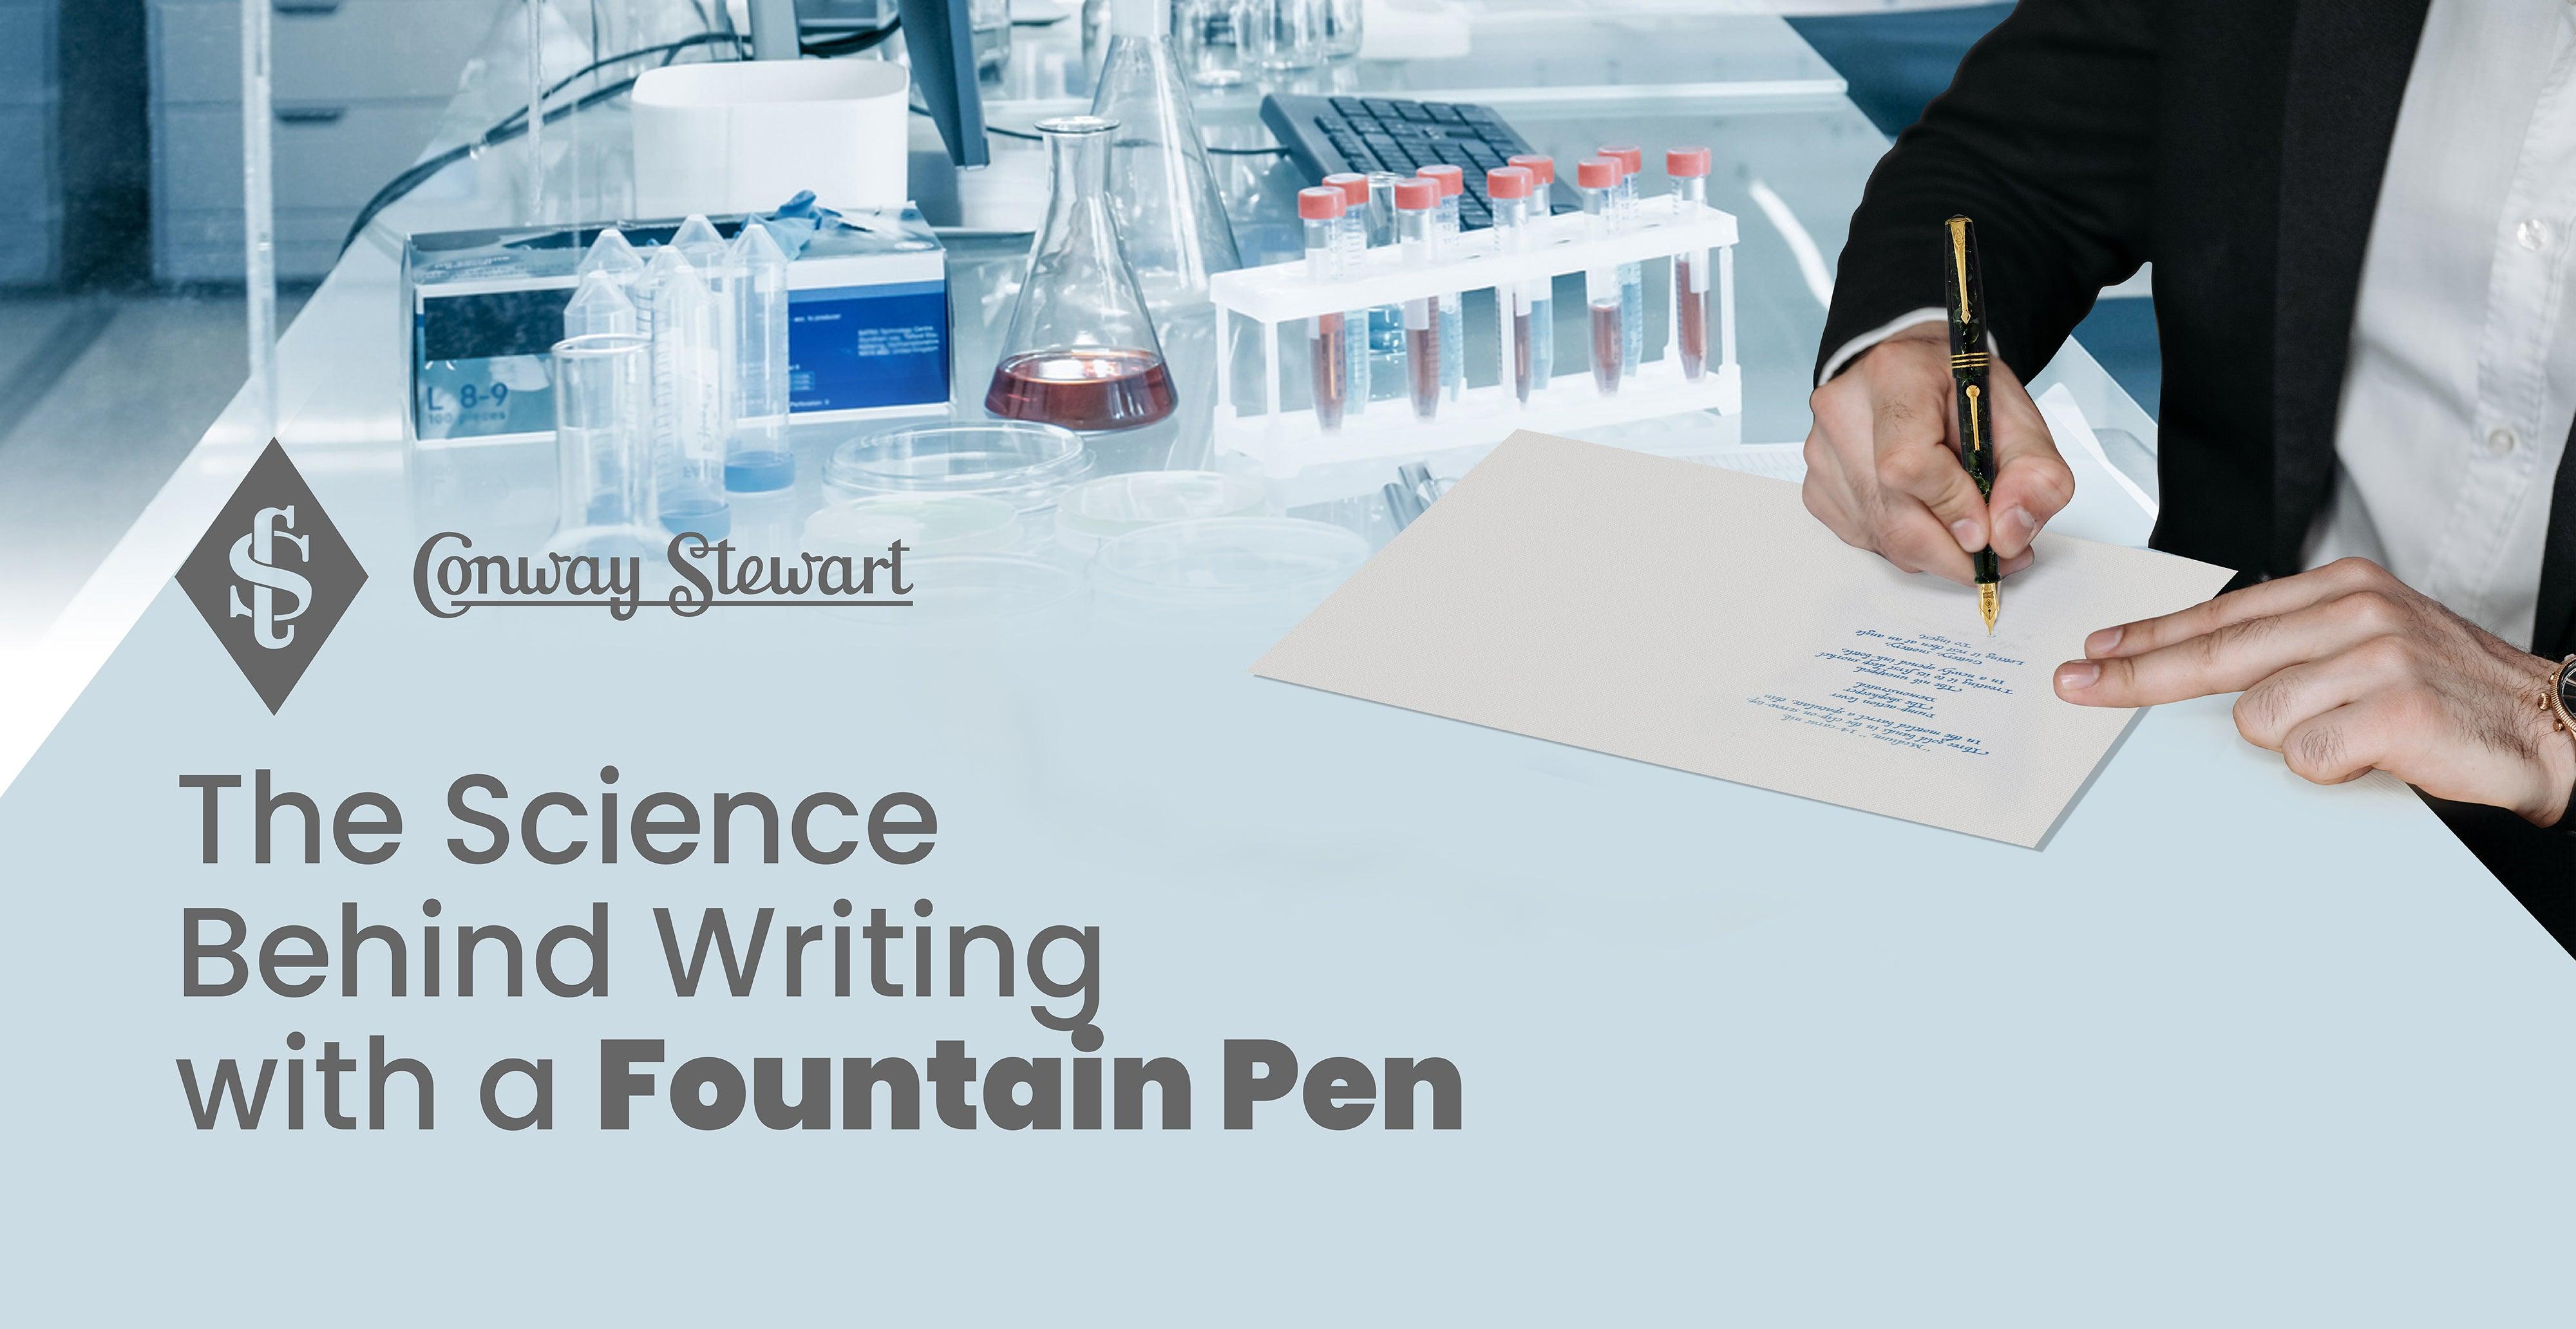 The Science Behind Writing with a Fountain Pen: A Focus on Conway Stewart Models conwaystewart.com